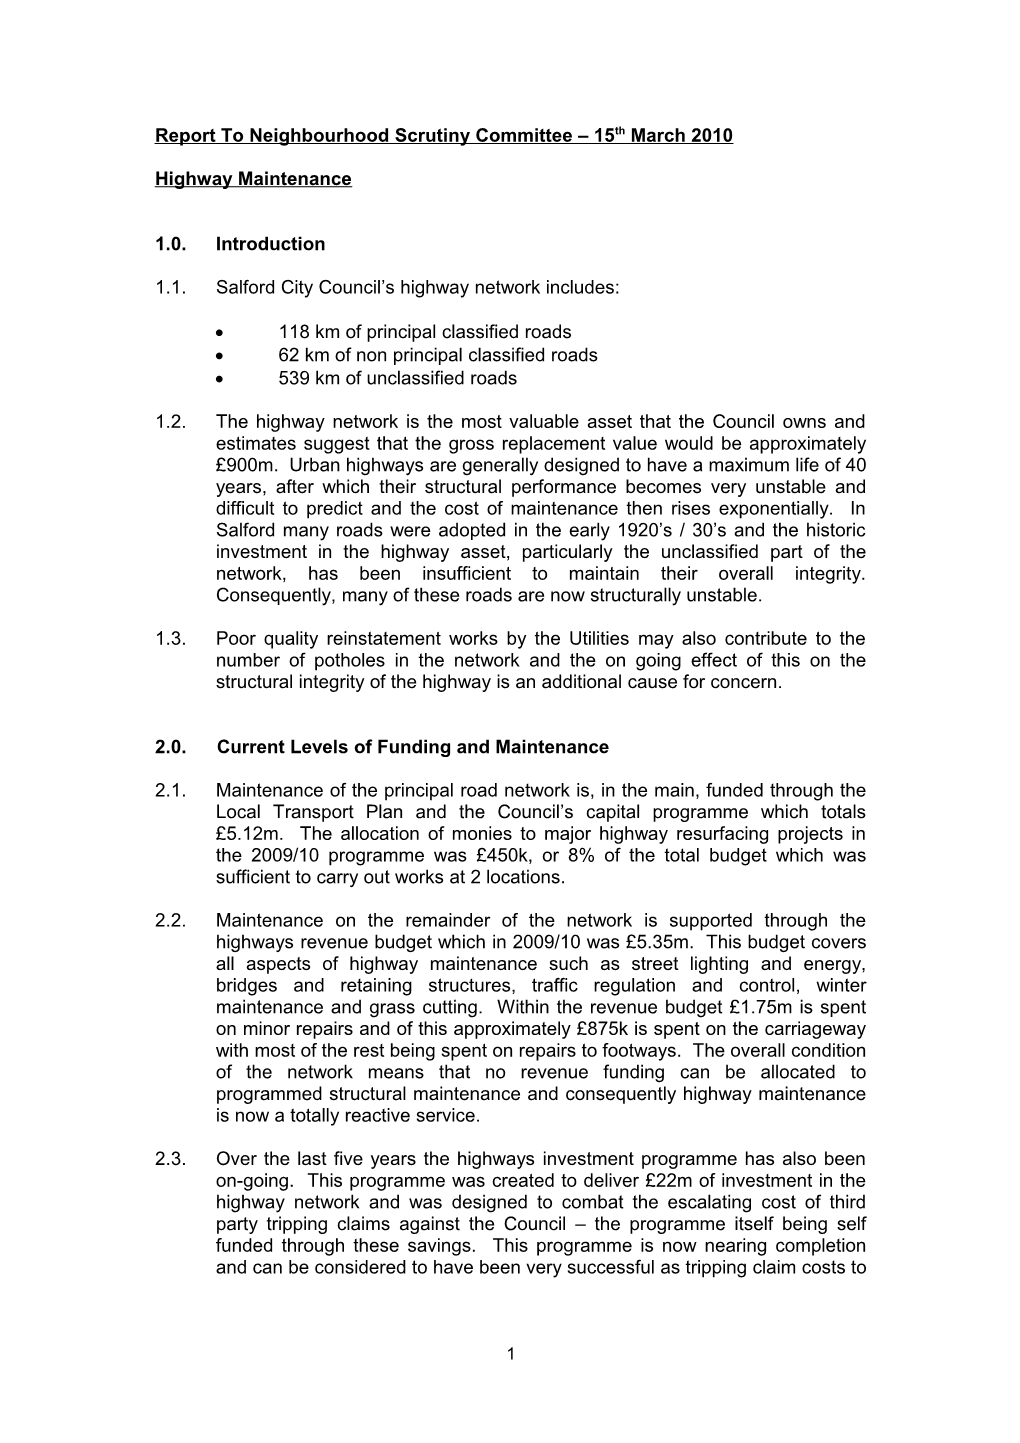 Report to Neighbourhood Scrutiny Committee 15Th March 2010